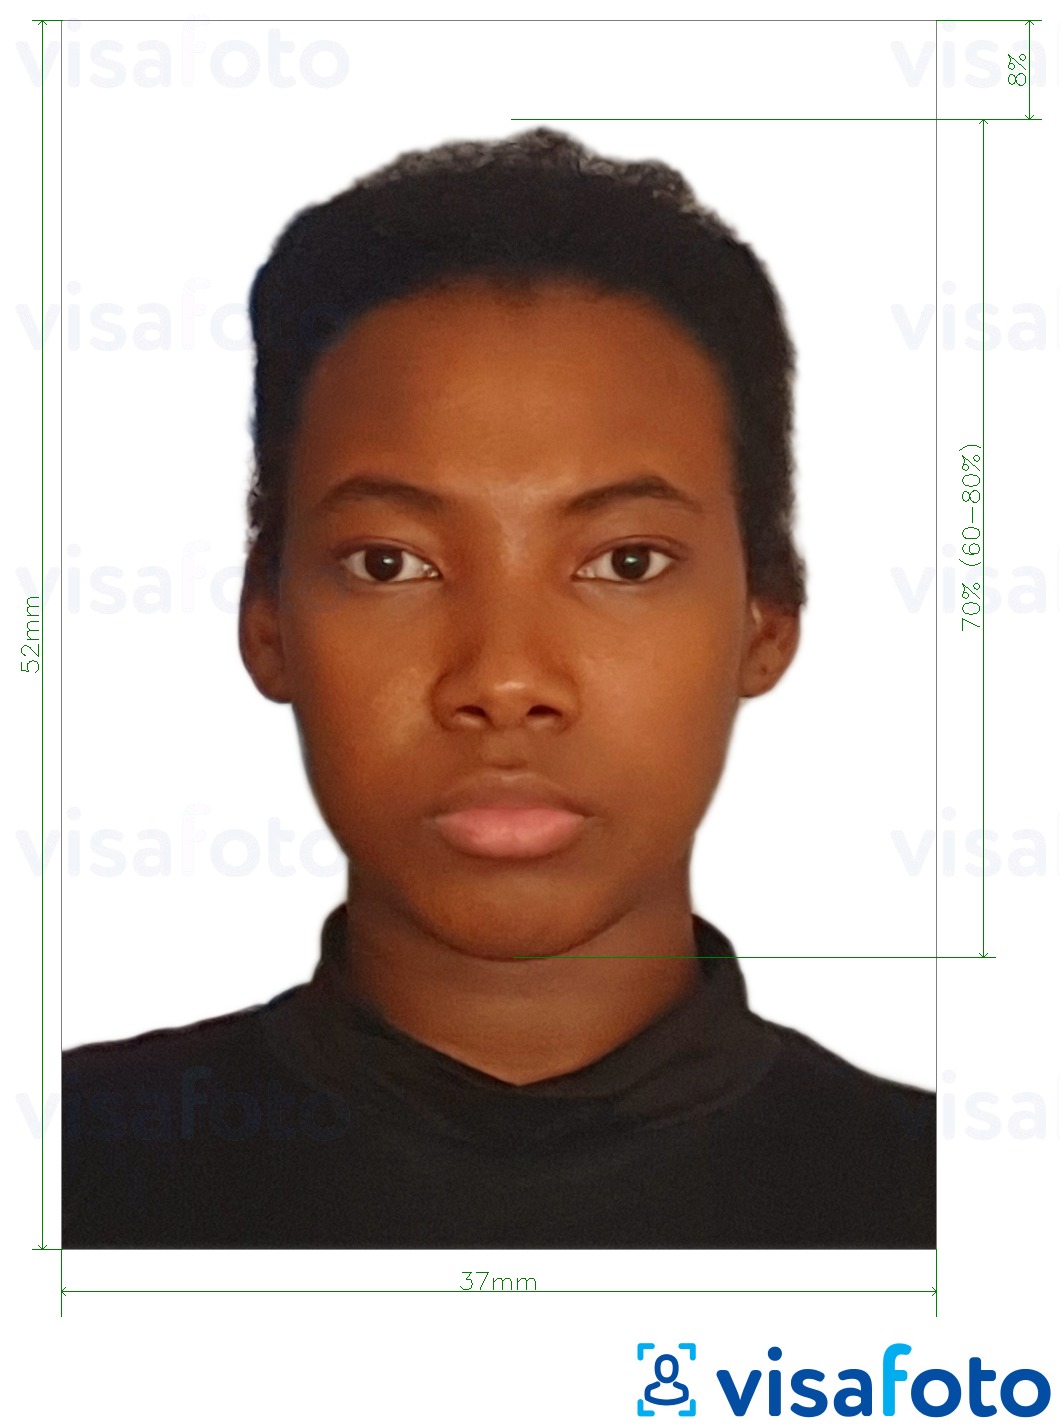 Example of photo for Namibia visa 37x52mm (3.7x5.2 cm) with exact size specification